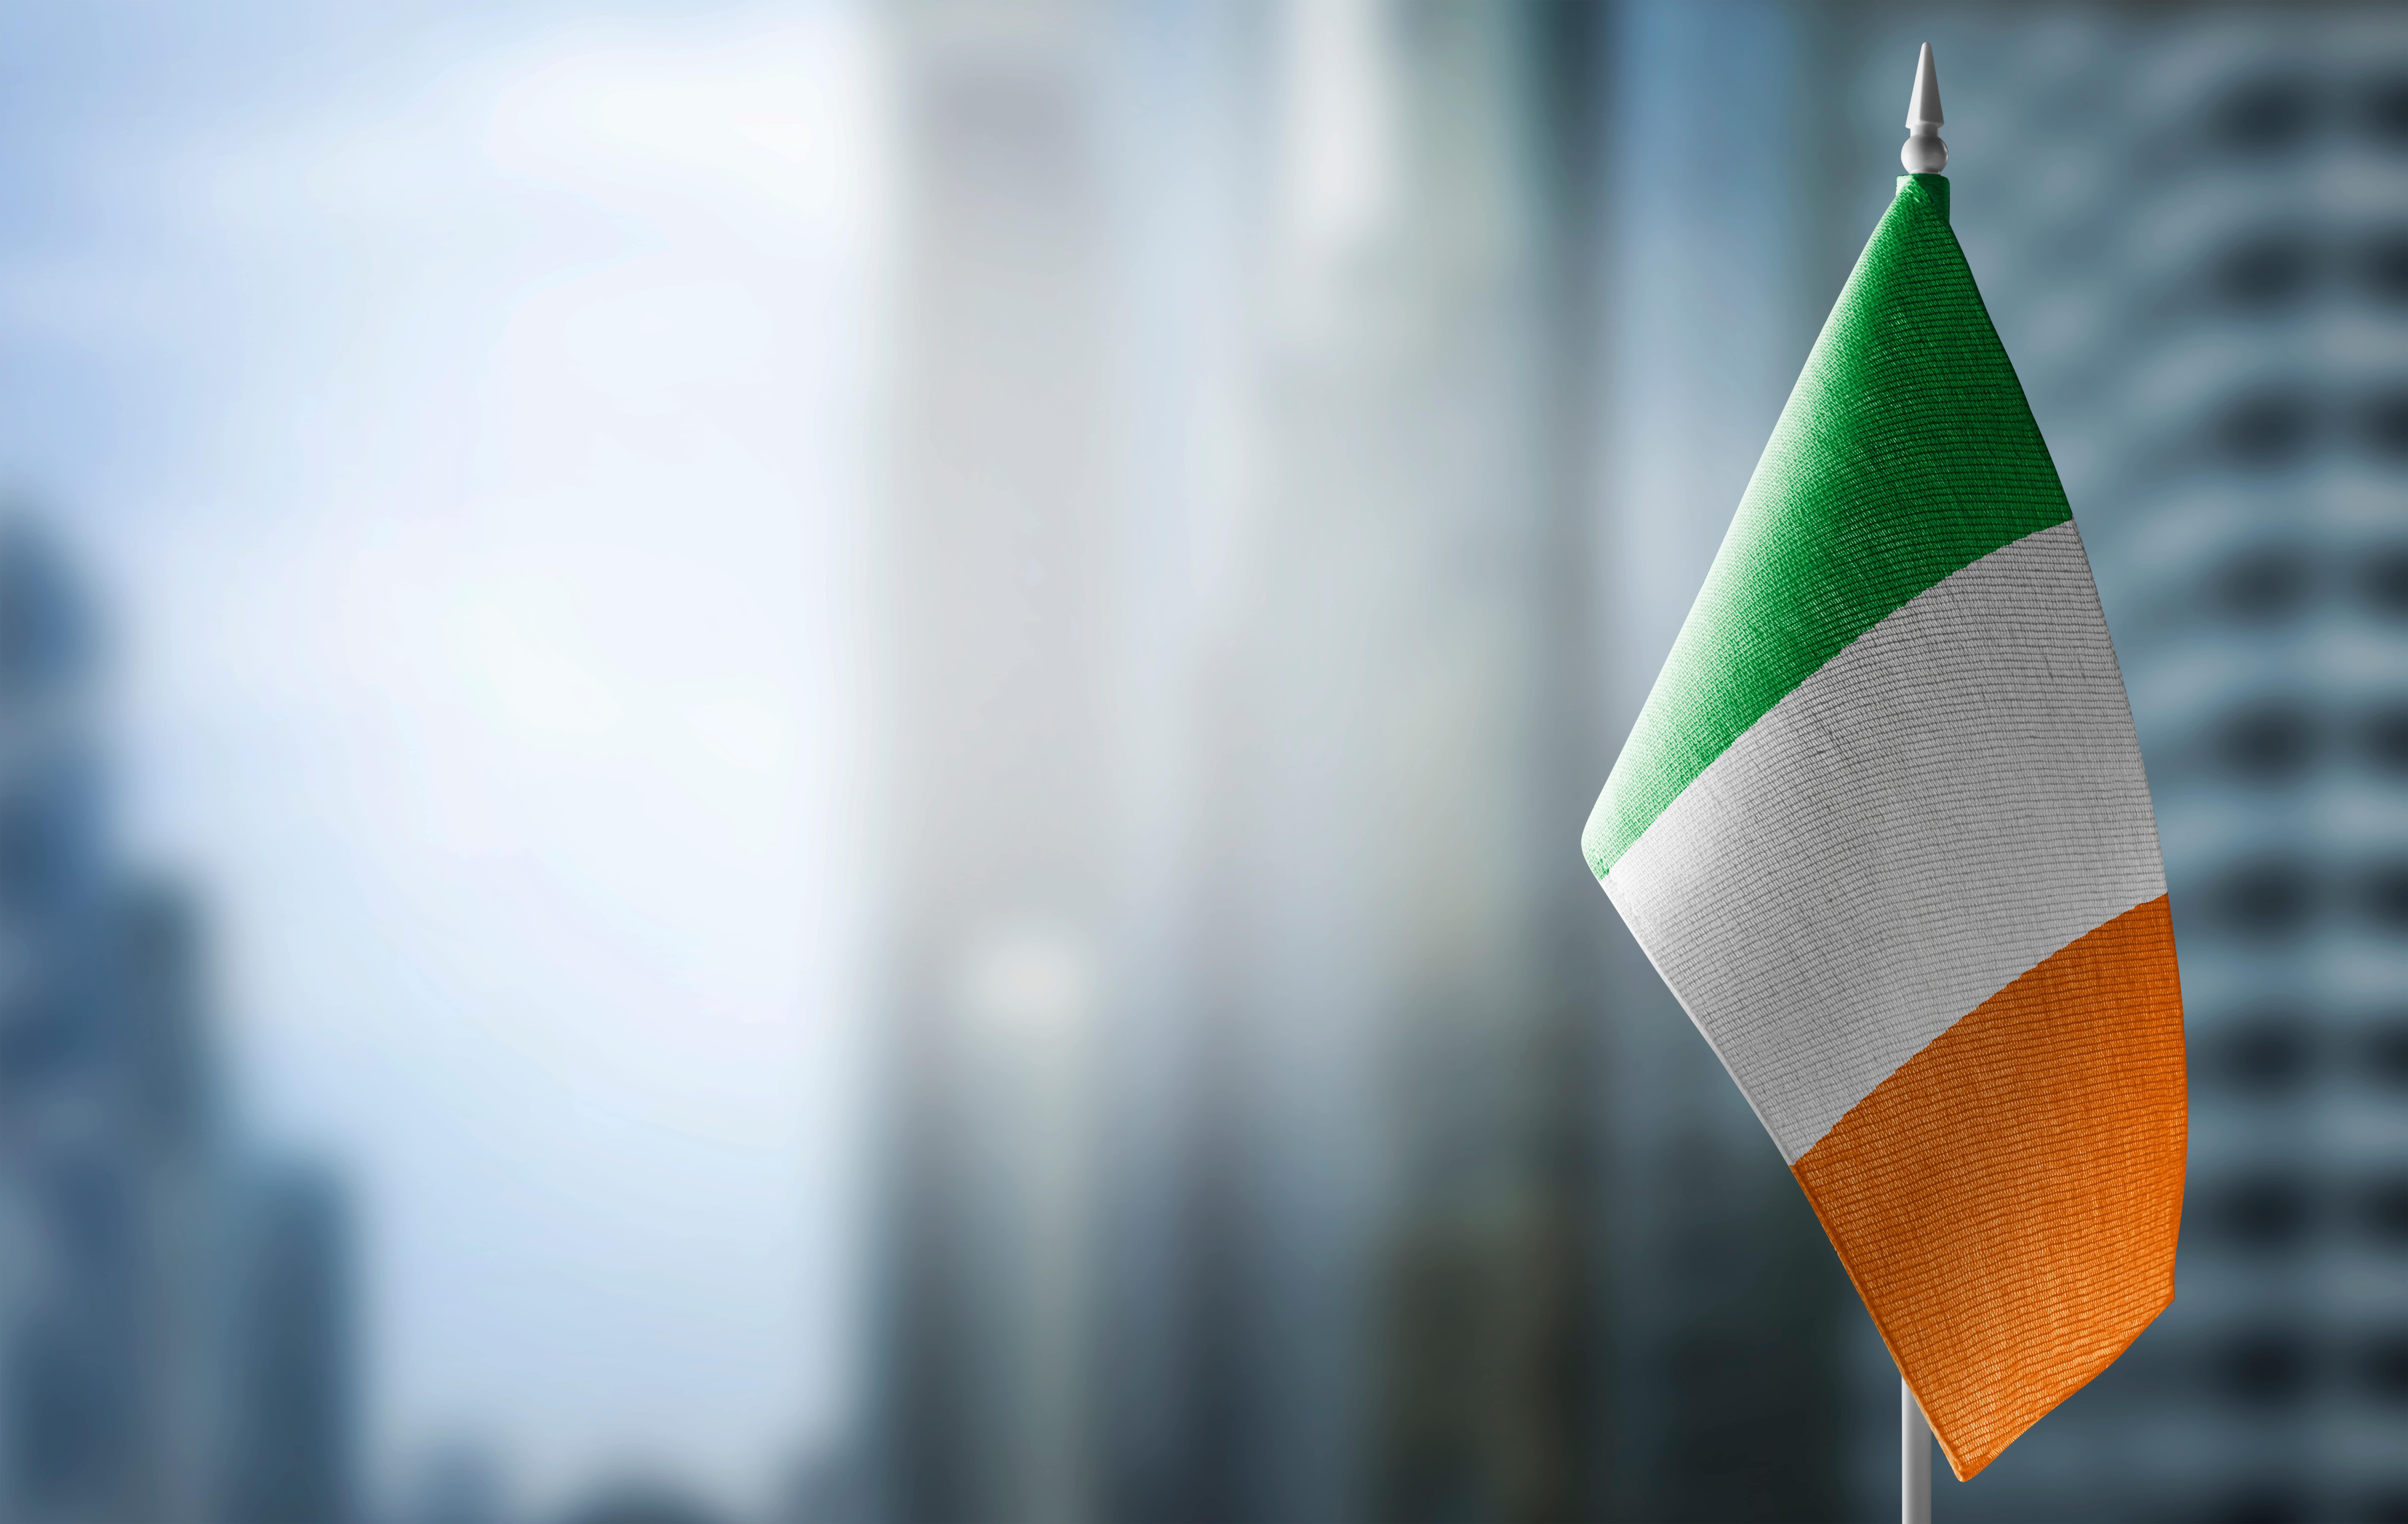 Irish flag waving with a blurred cityscape in the background.